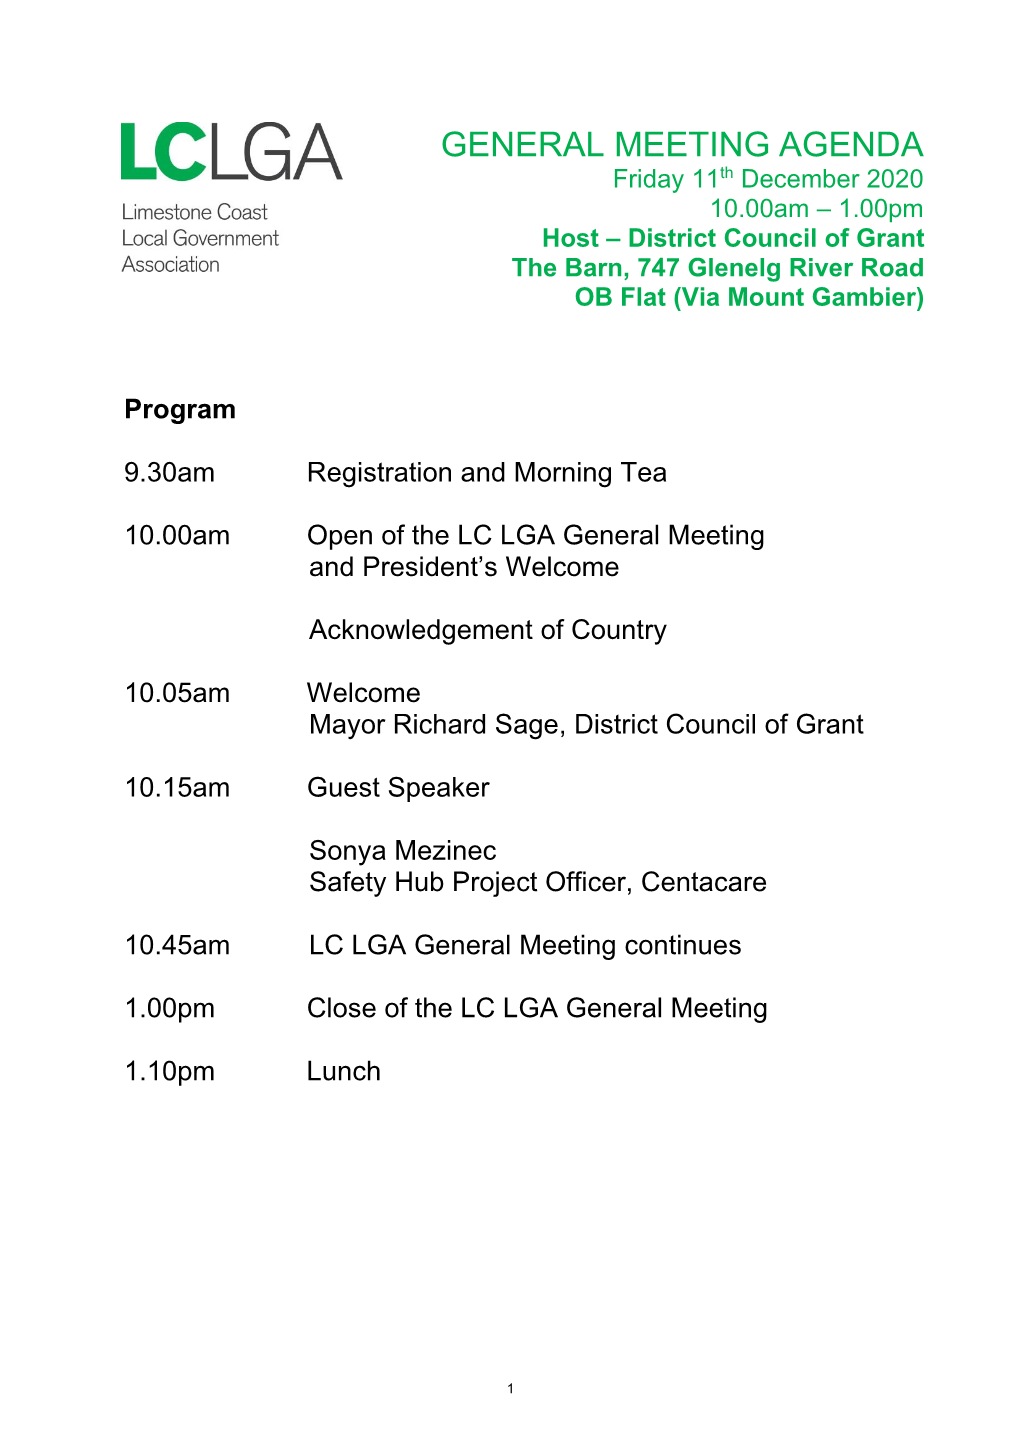 GENERAL MEETING AGENDA Friday 11Th December 2020 10.00Am – 1.00Pm Host – District Council of Grant the Barn, 747 Glenelg River Road OB Flat (Via Mount Gambier)